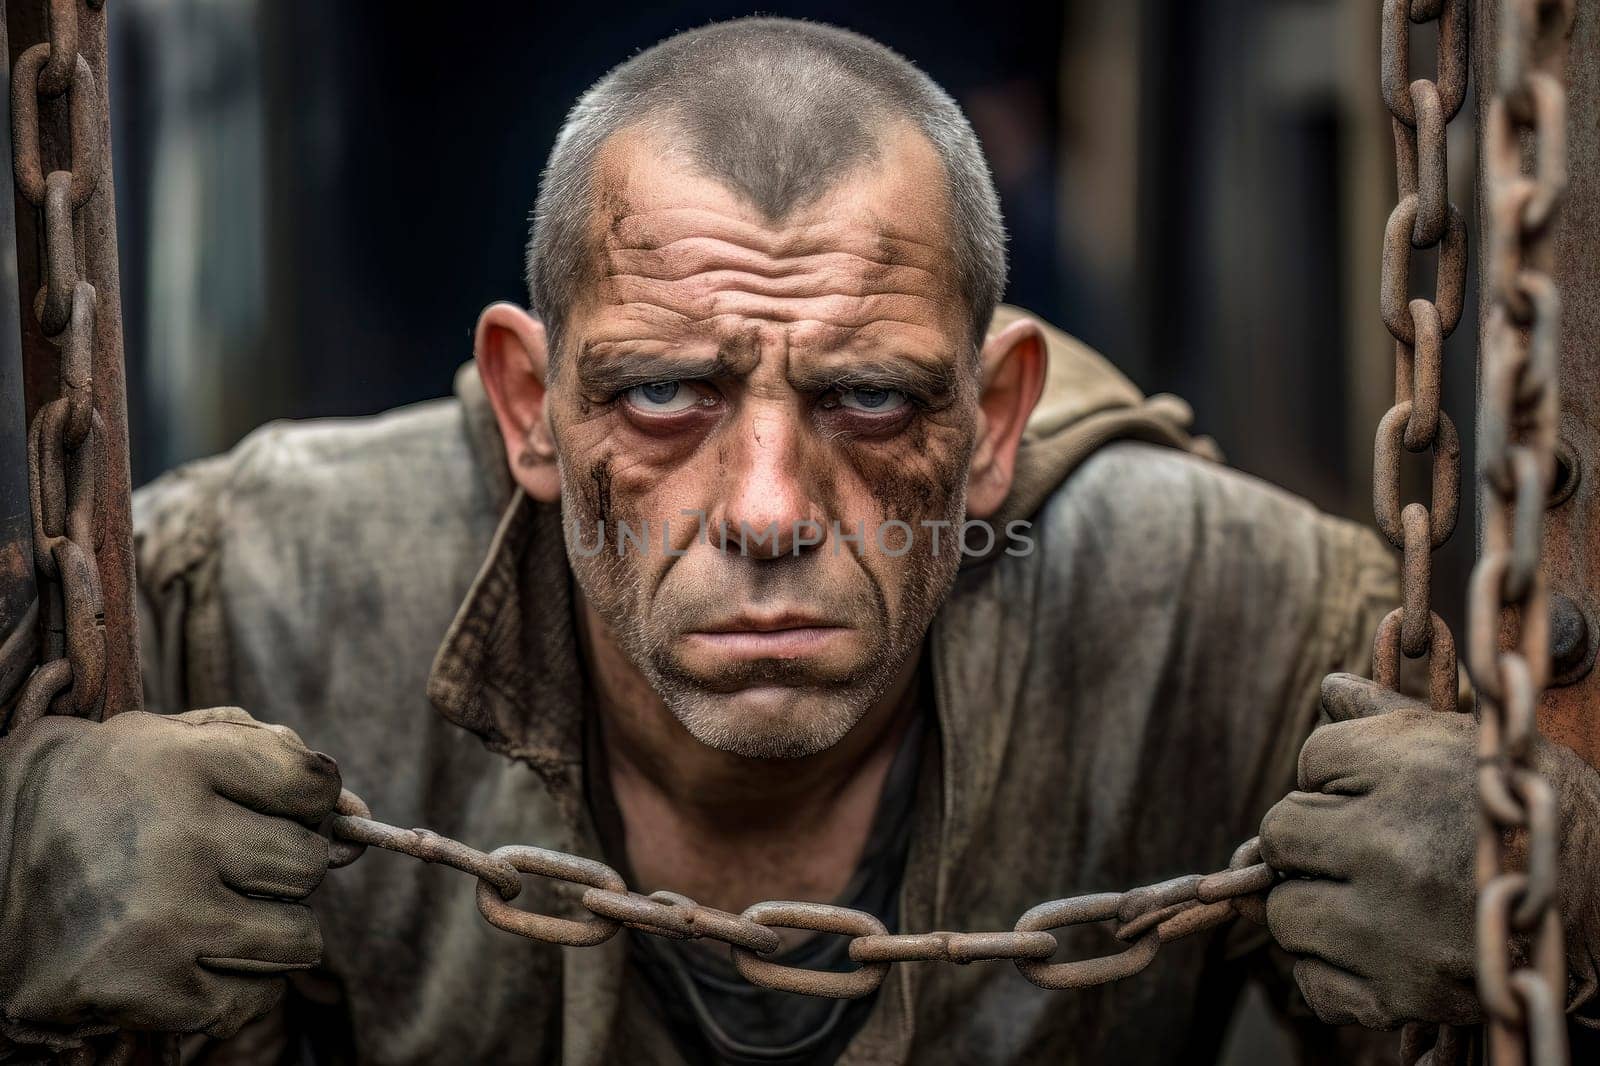 Captivating Close-Up of a Sad Chained Man by pippocarlot